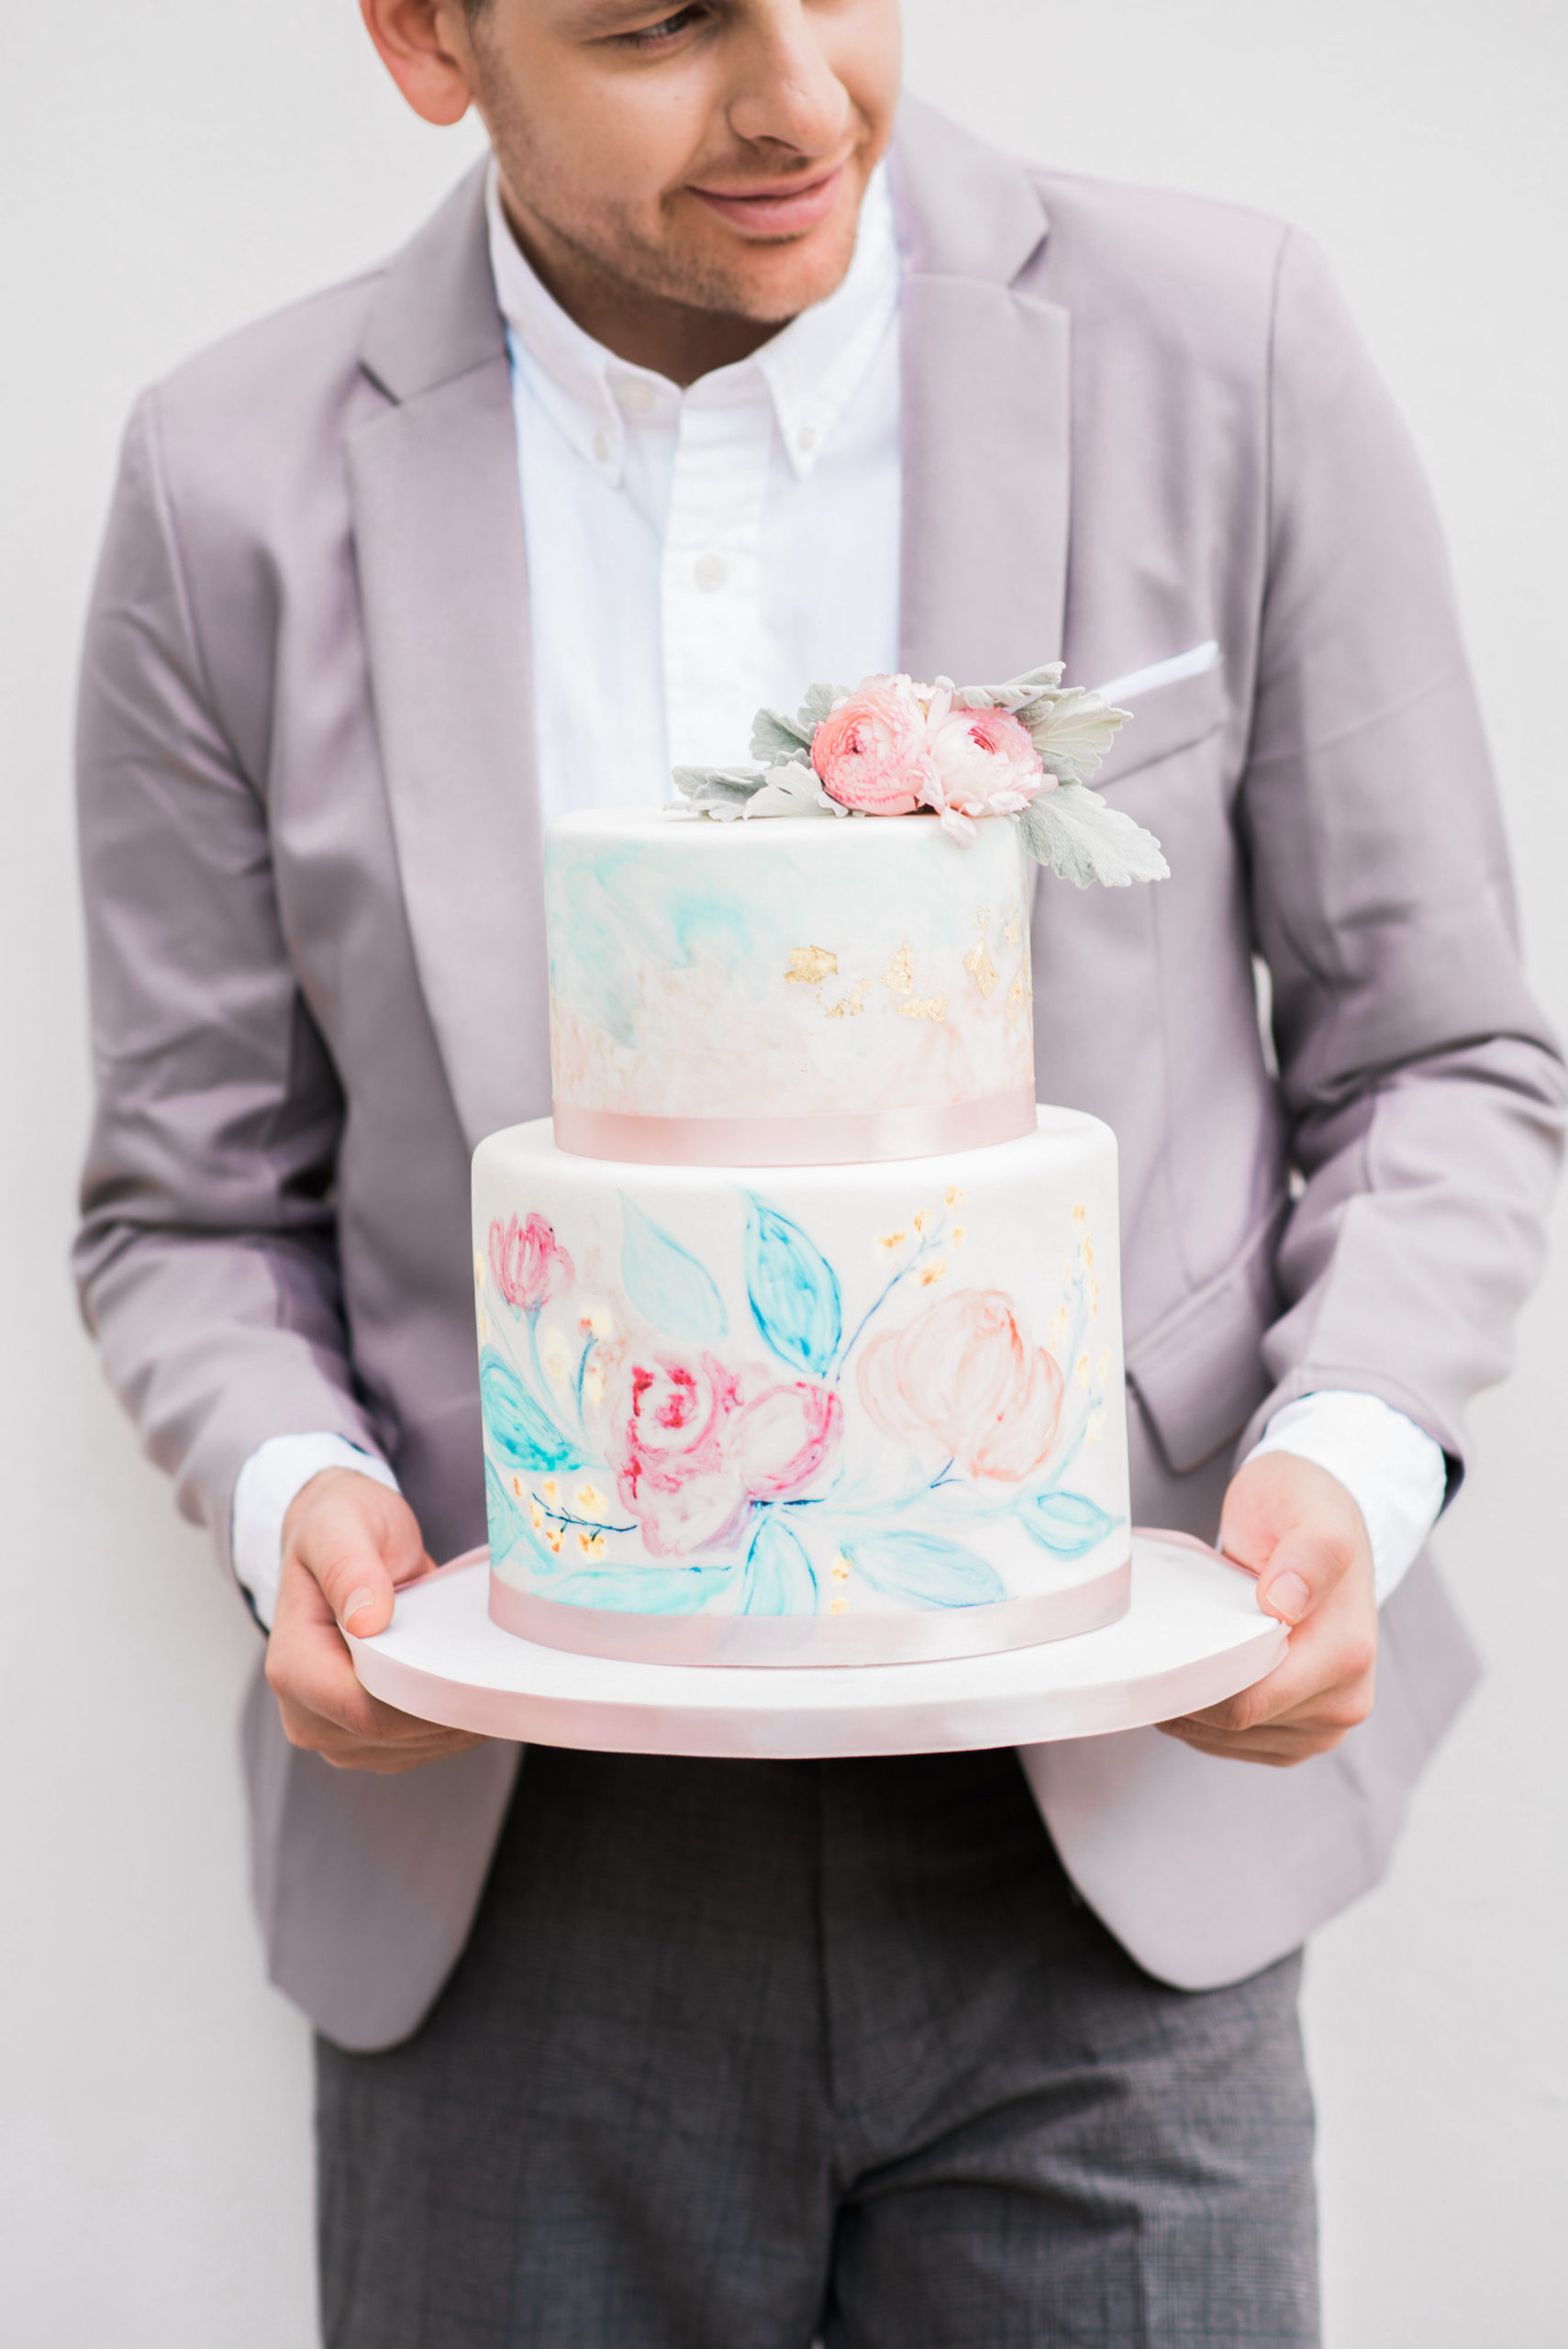 The Lady and the Tramp wedding included watercolor hand painted wedding cake that mirrored the watercolor invitations and colors as well